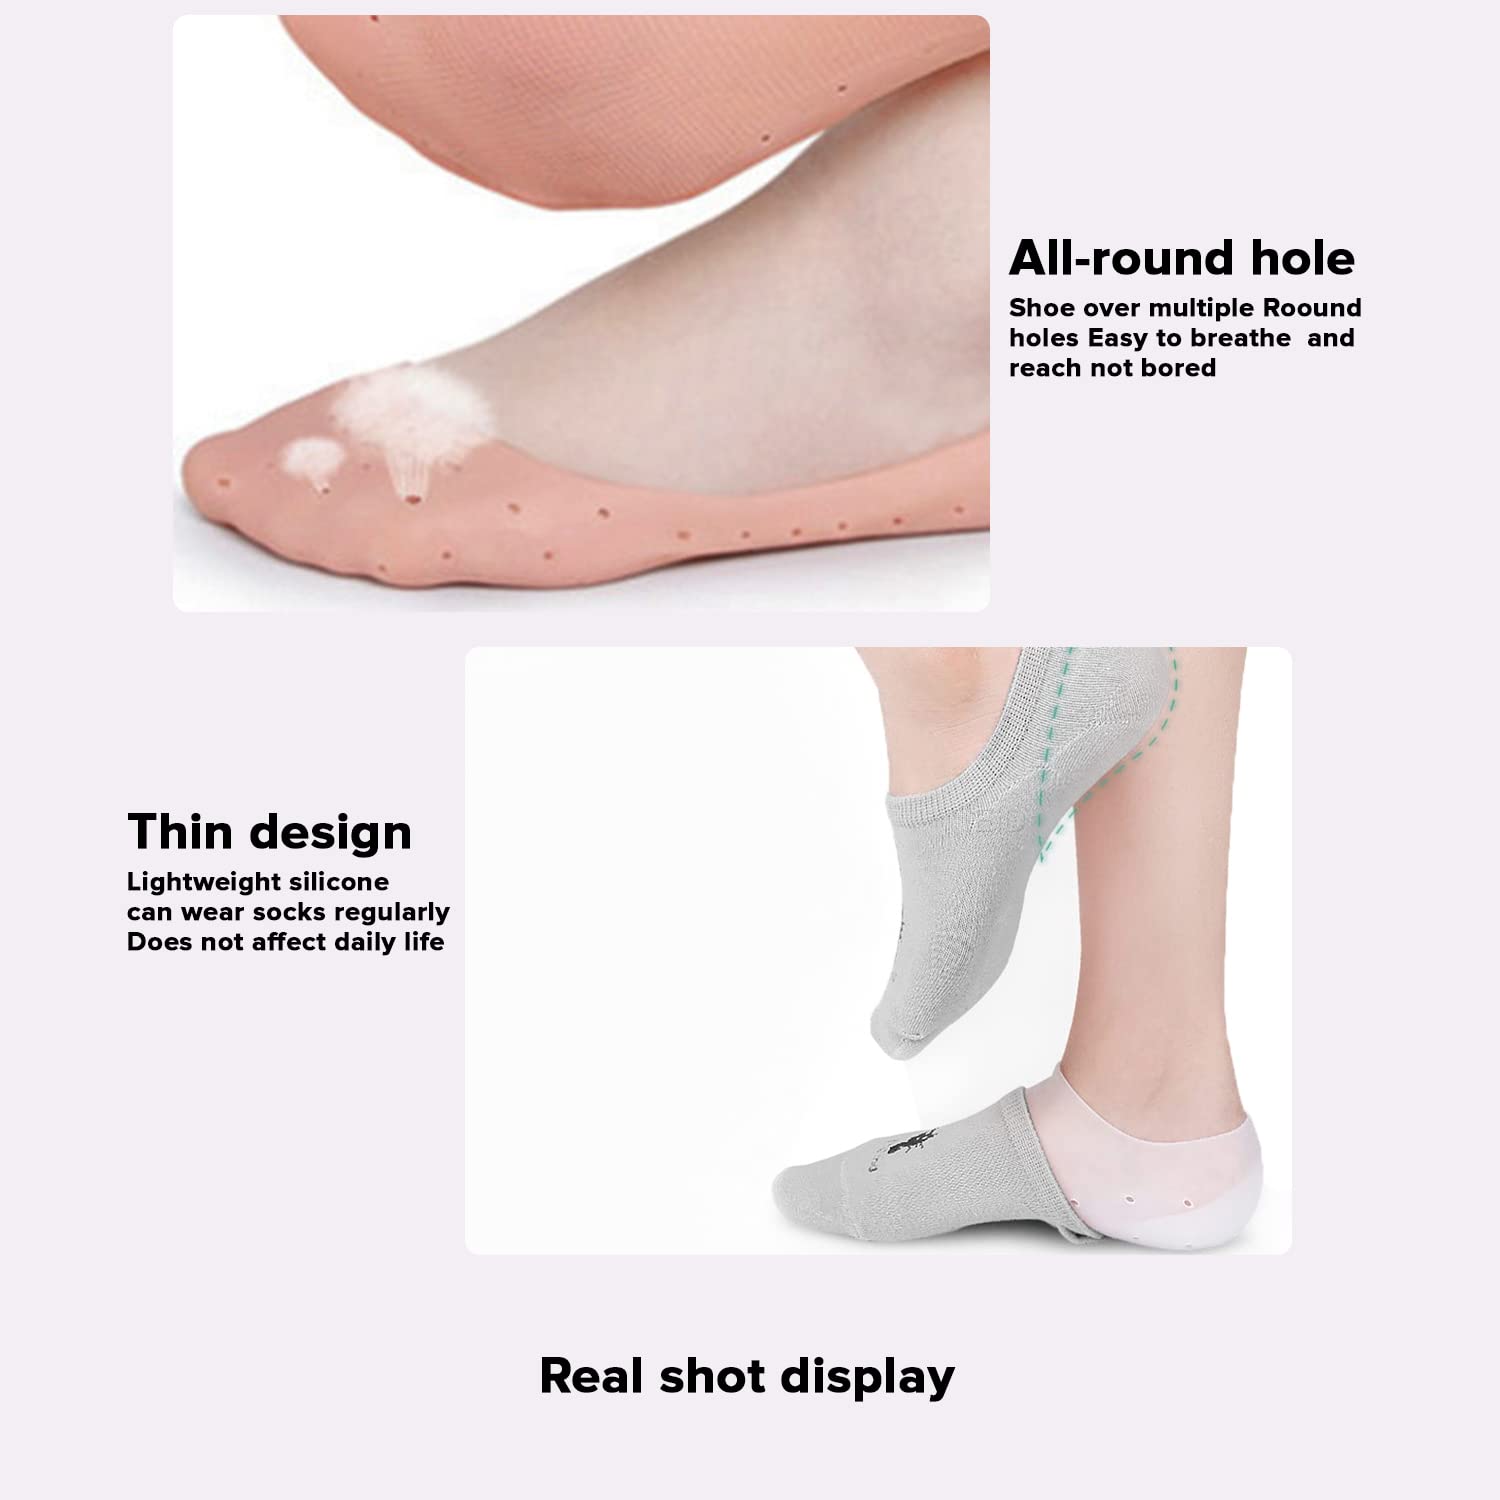 Foot Peel Mask - 3 Pairs - Exfoliating Peeling Callus Remover, Repairs Cracked  Heels & Dead, Dry Skin, for Smoother and Softer Feet (Lavender) -  Walmart.com